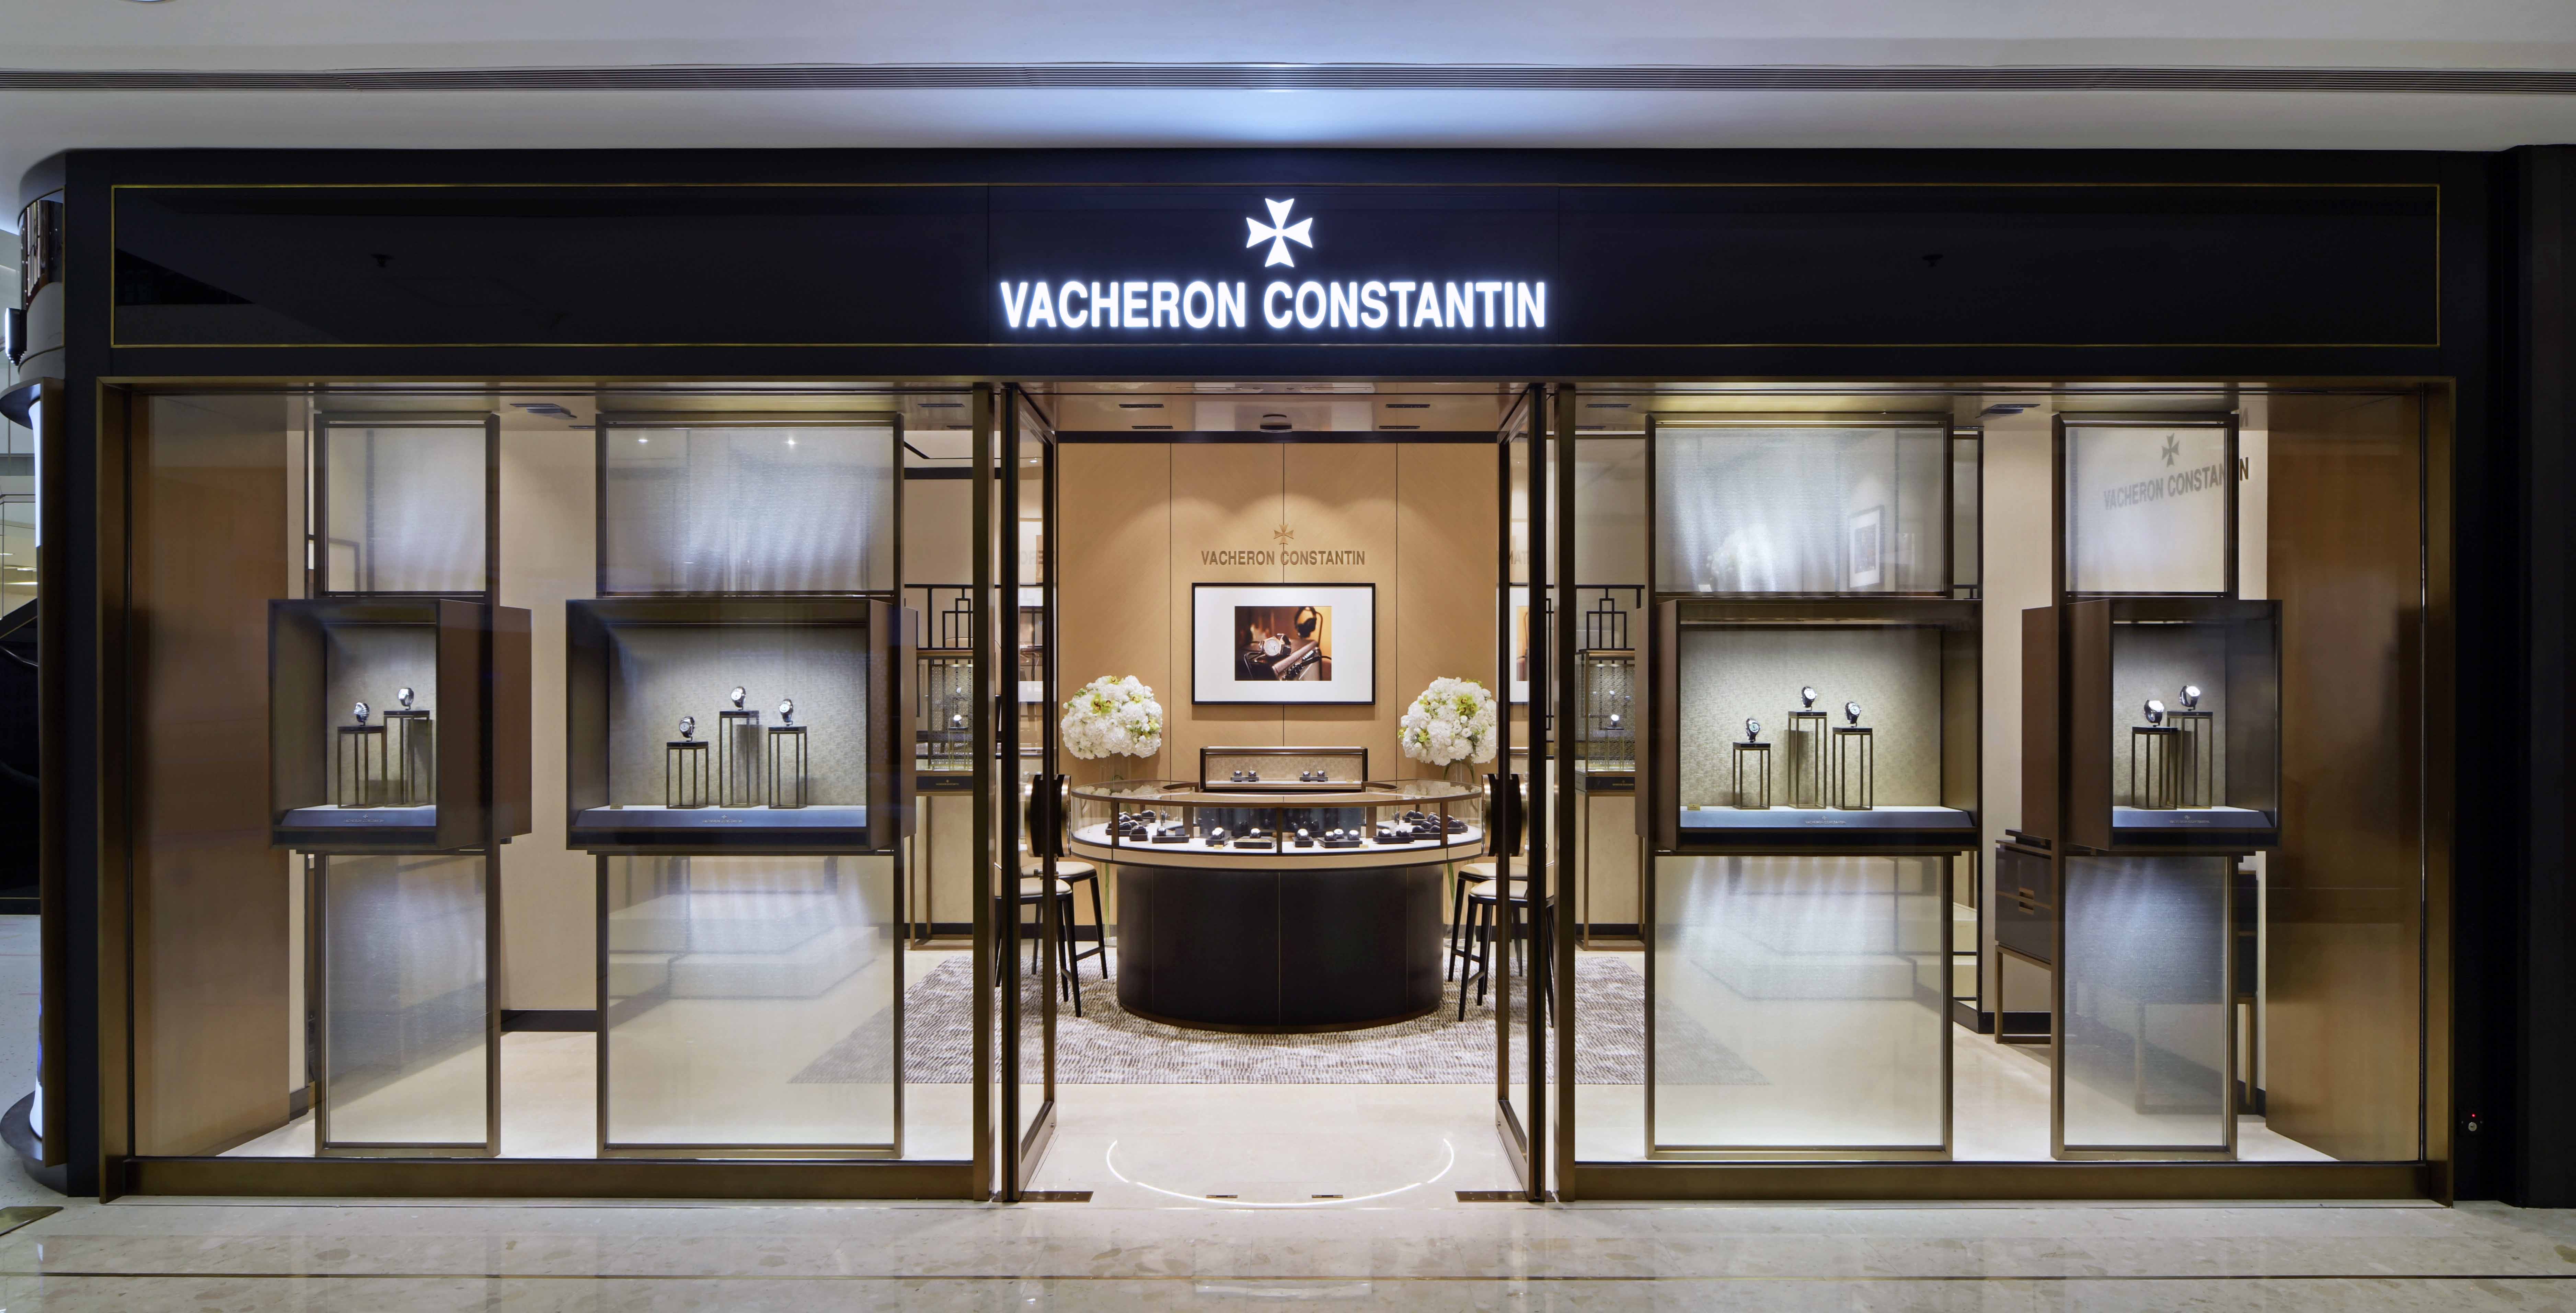 Vacheron Constantin Presents: Unveiling of a New Chapter in Hong Kong ...